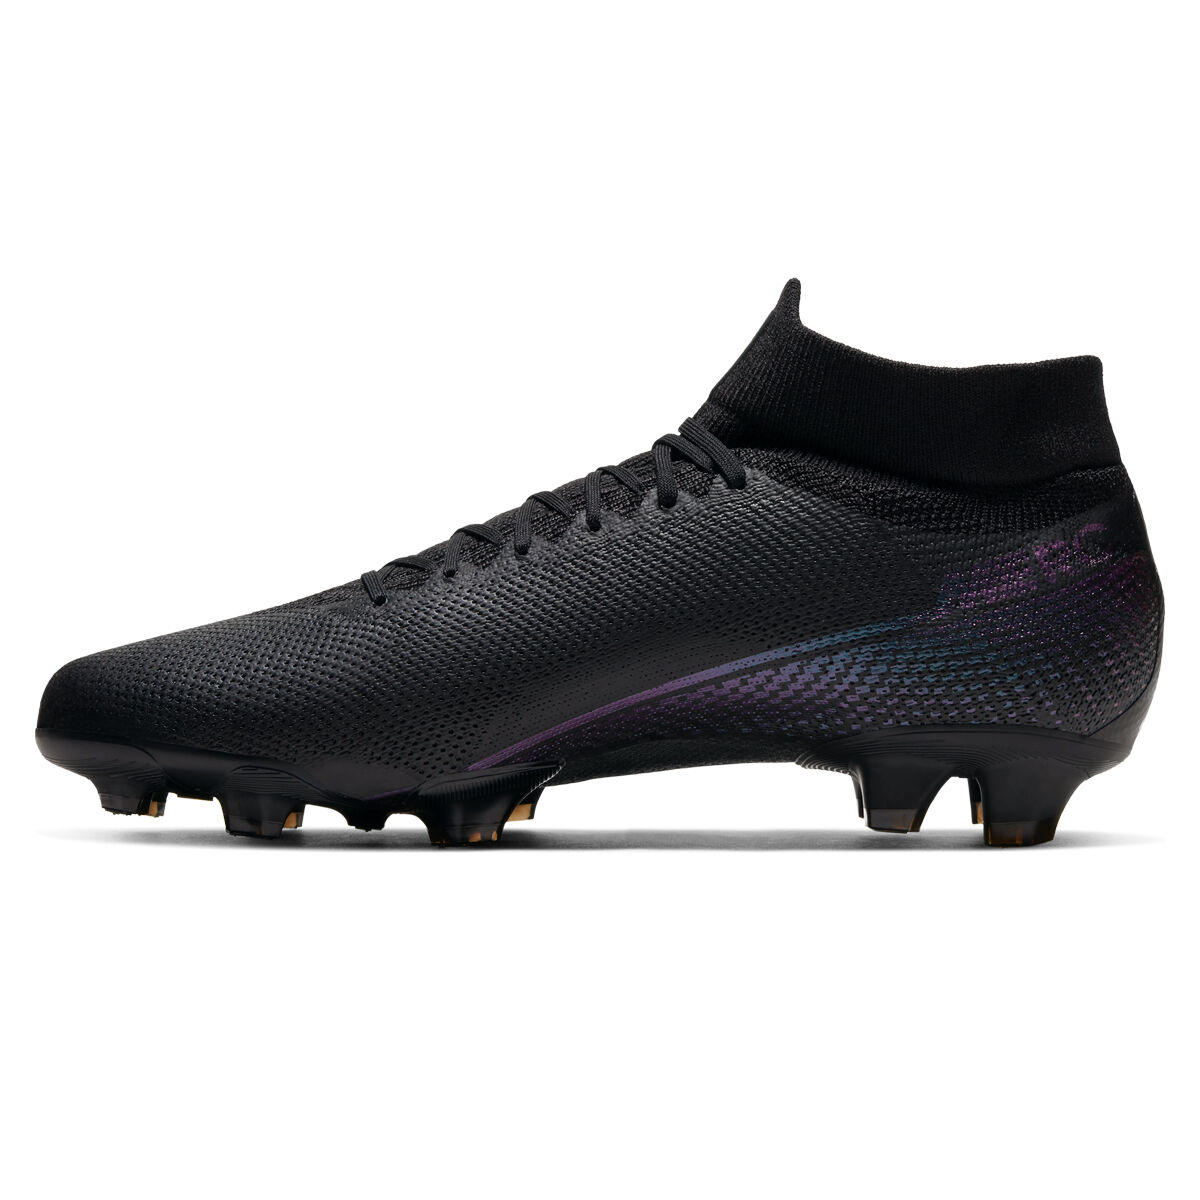 Nike Mercurial Superfly 360 Elite FG Soccer Cleats Products